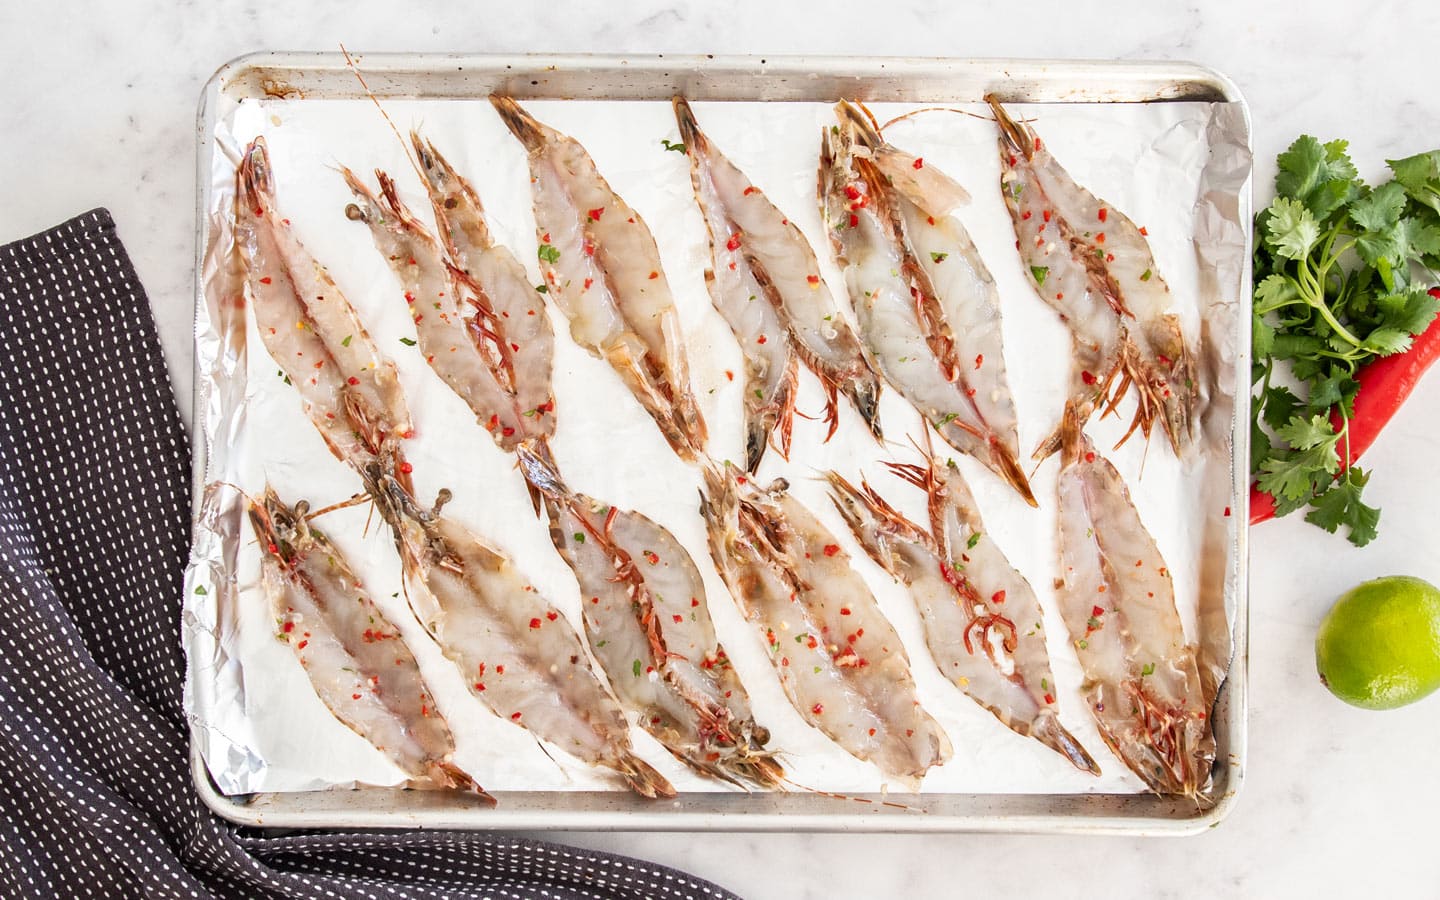 12 prawns laid out on a baking sheet ready to cook.